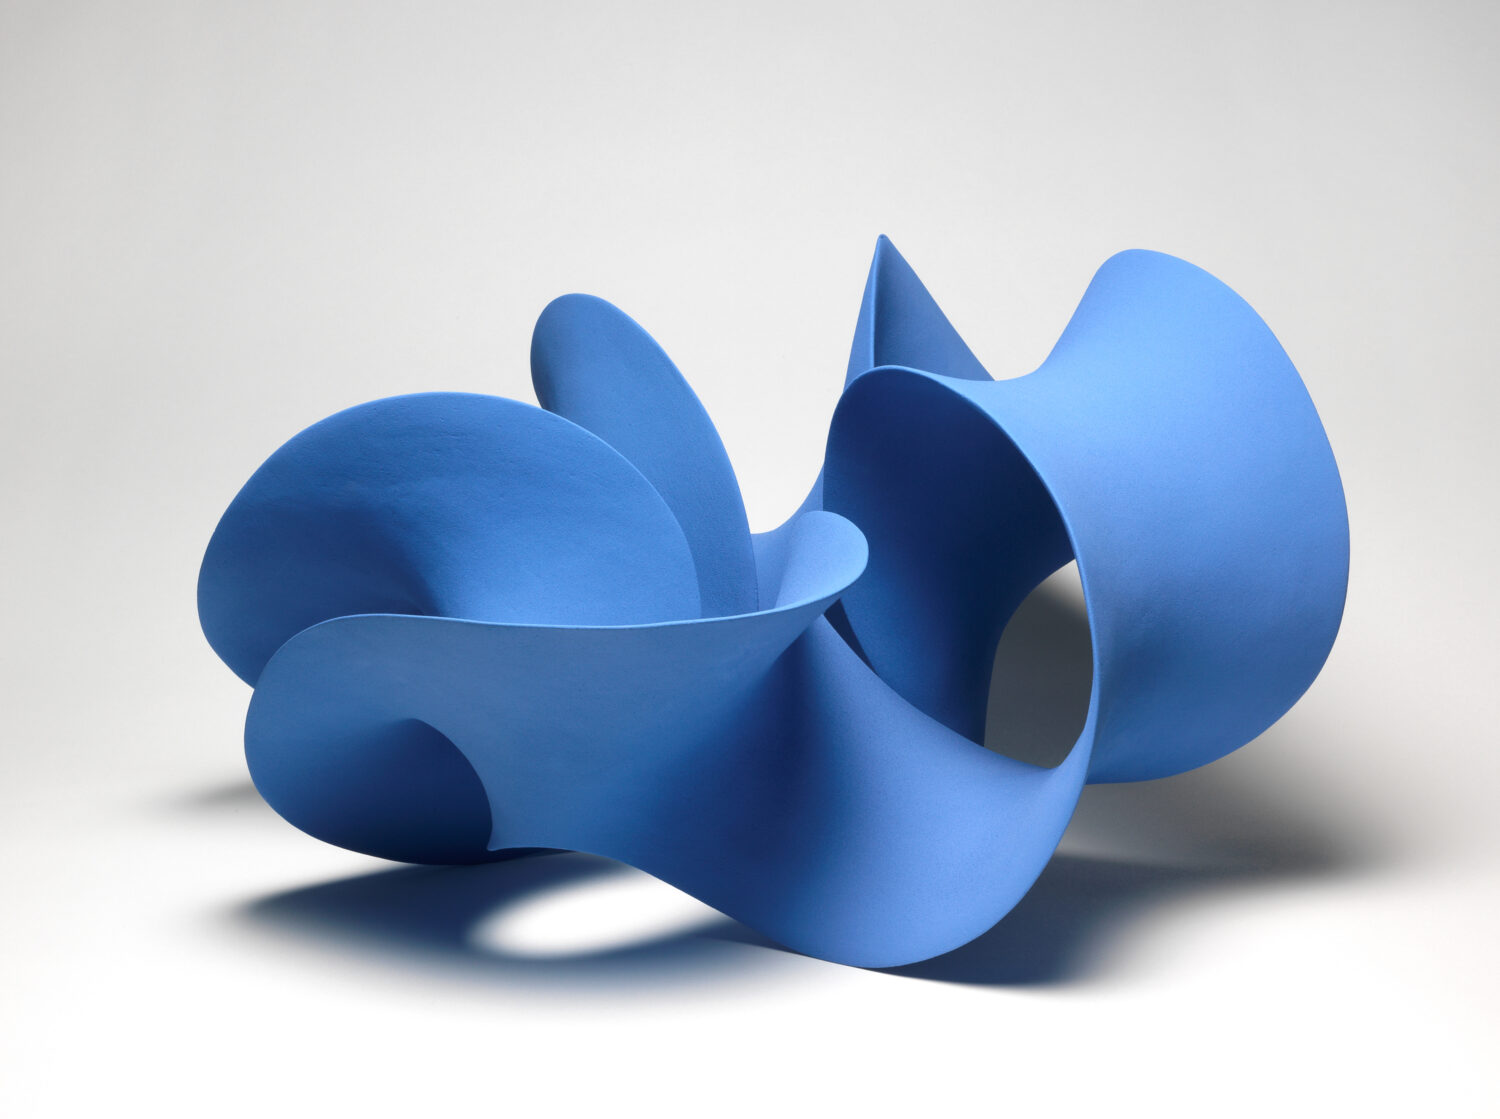 A photograph of a blue sculpture which twists and turns around in a circle. It is a mobius strip.